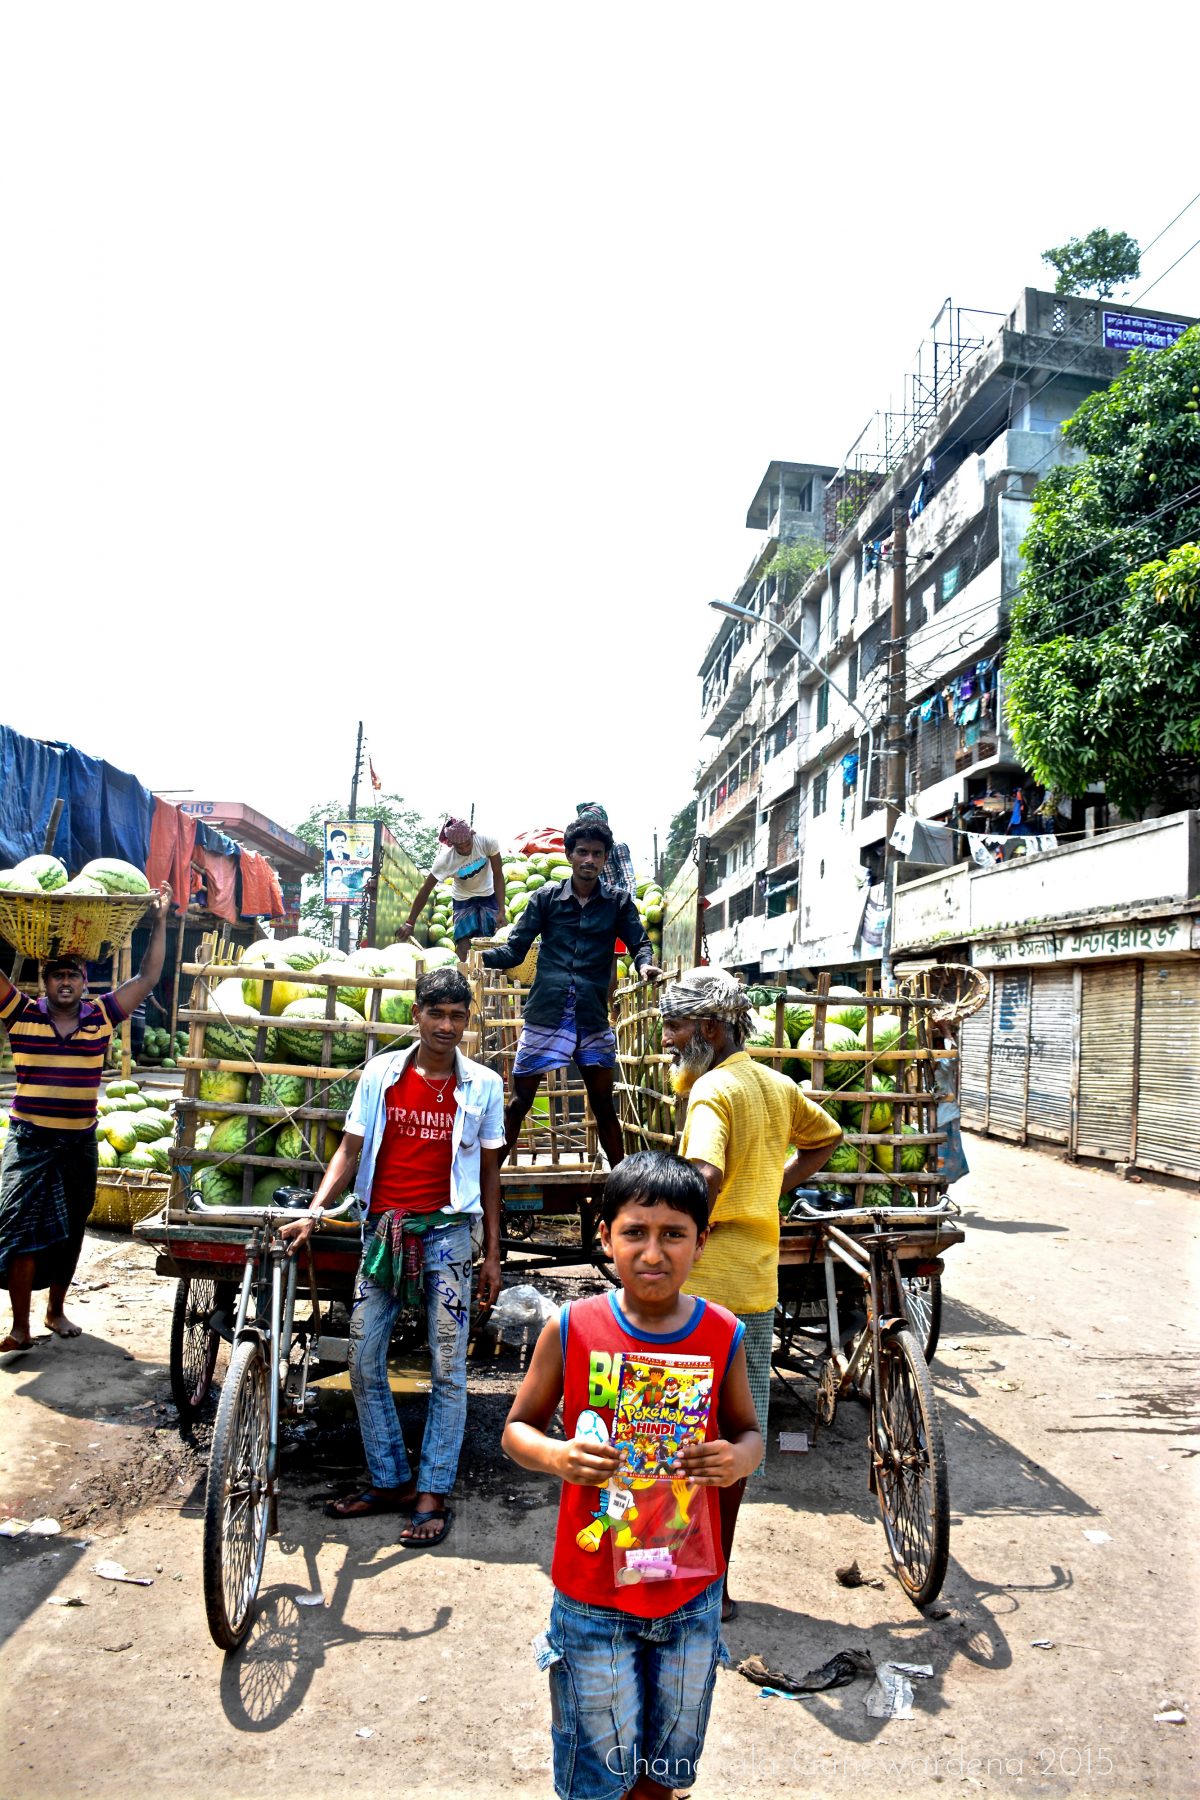 Of Melons And Men: fruits and veggies are unloaded at ports, alongside the more bountiful hauls of fish. Here, many large and heavy melons are being loaded on to cycle carts to be taken to market.